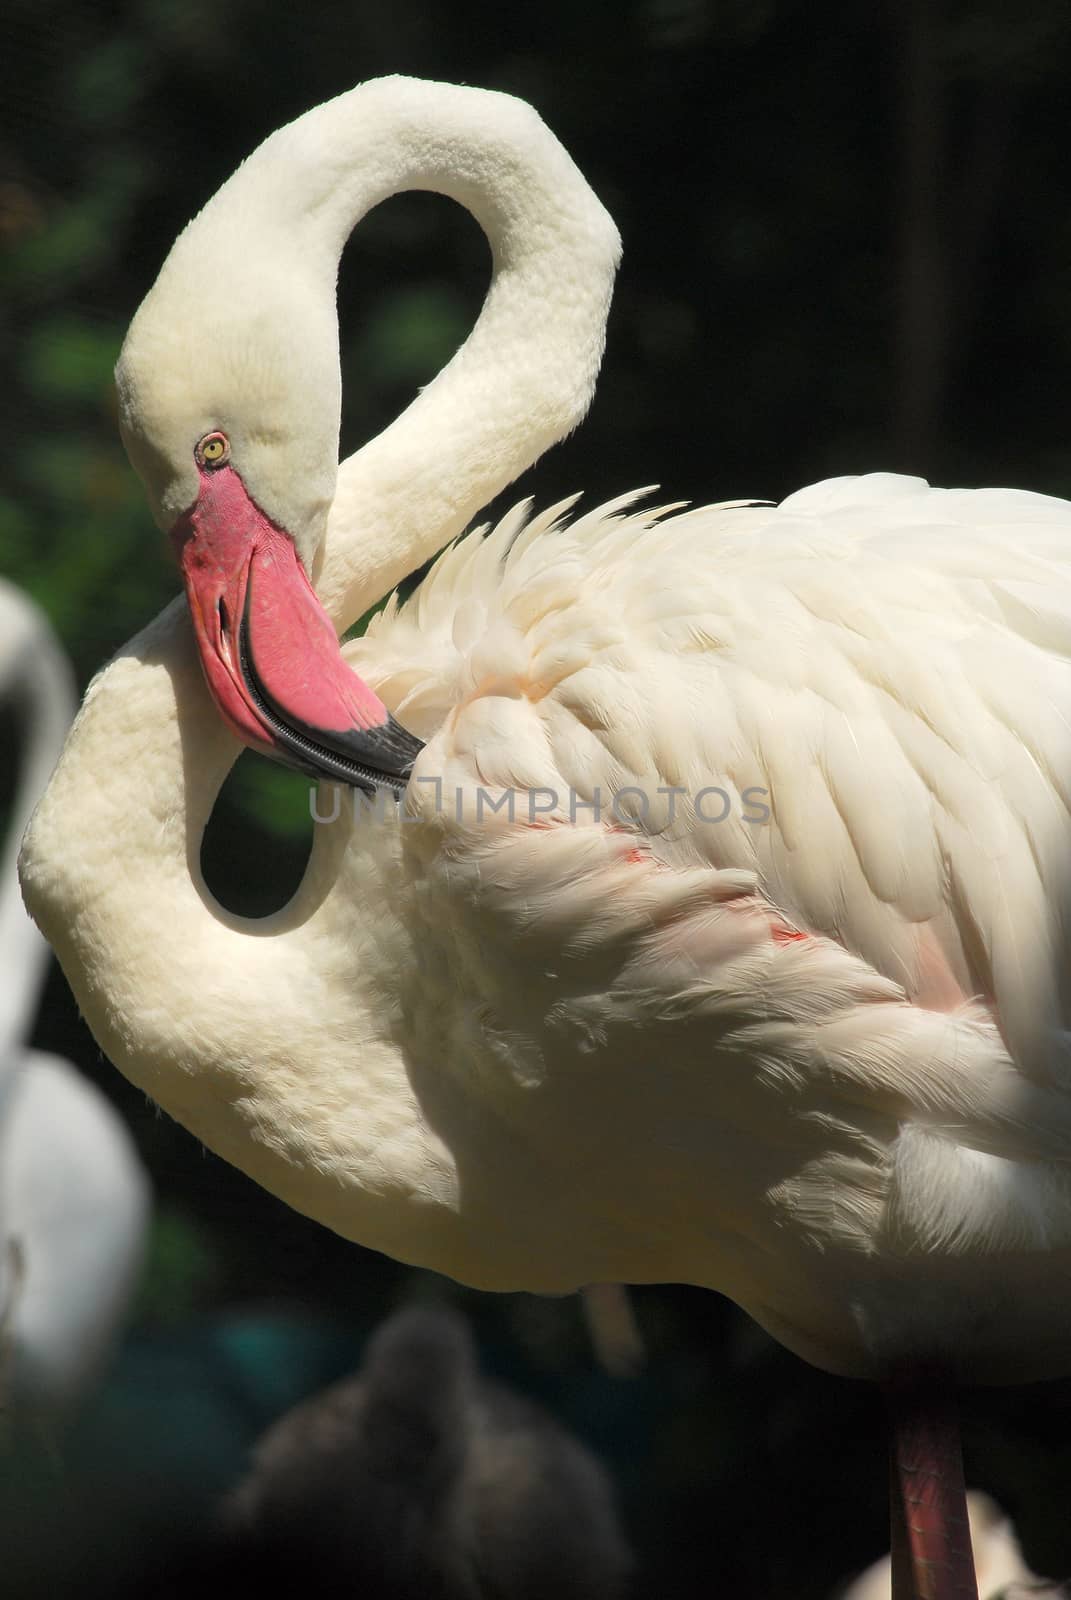 Detail of the head of a pink flamingo